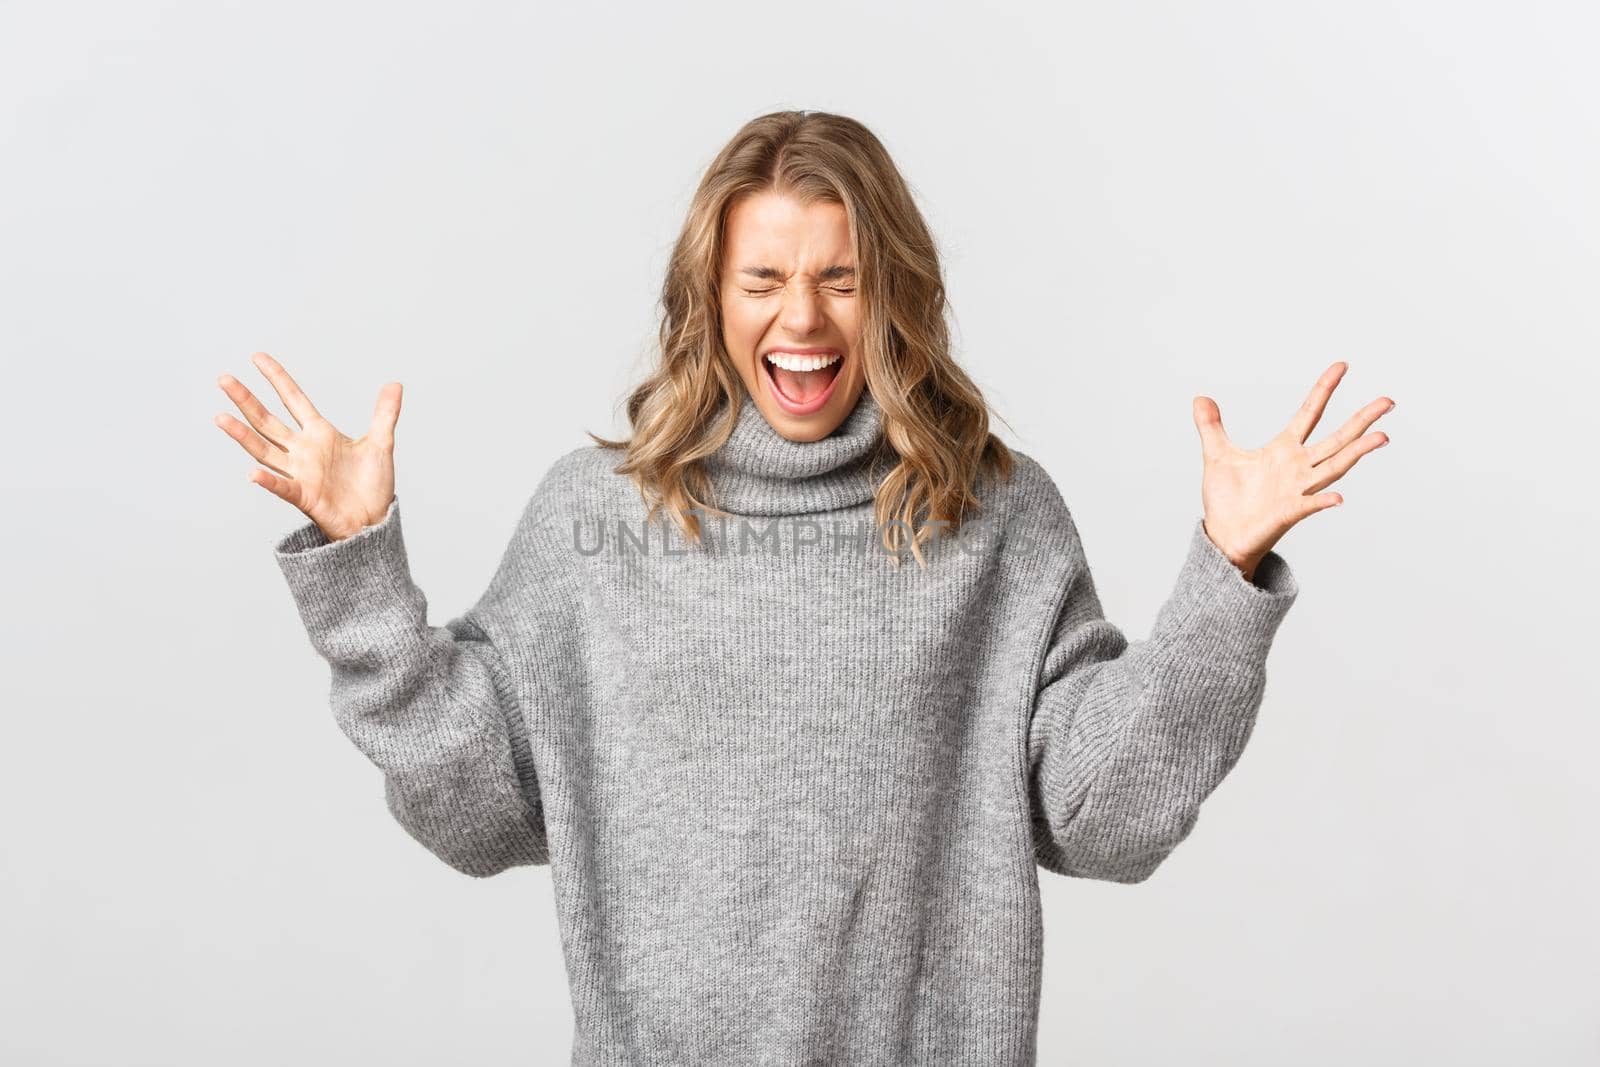 Portrait of blond girl in casual grey sweater losing control over emotions, screaming and shaking hands distressed, standing over white background and yelling.